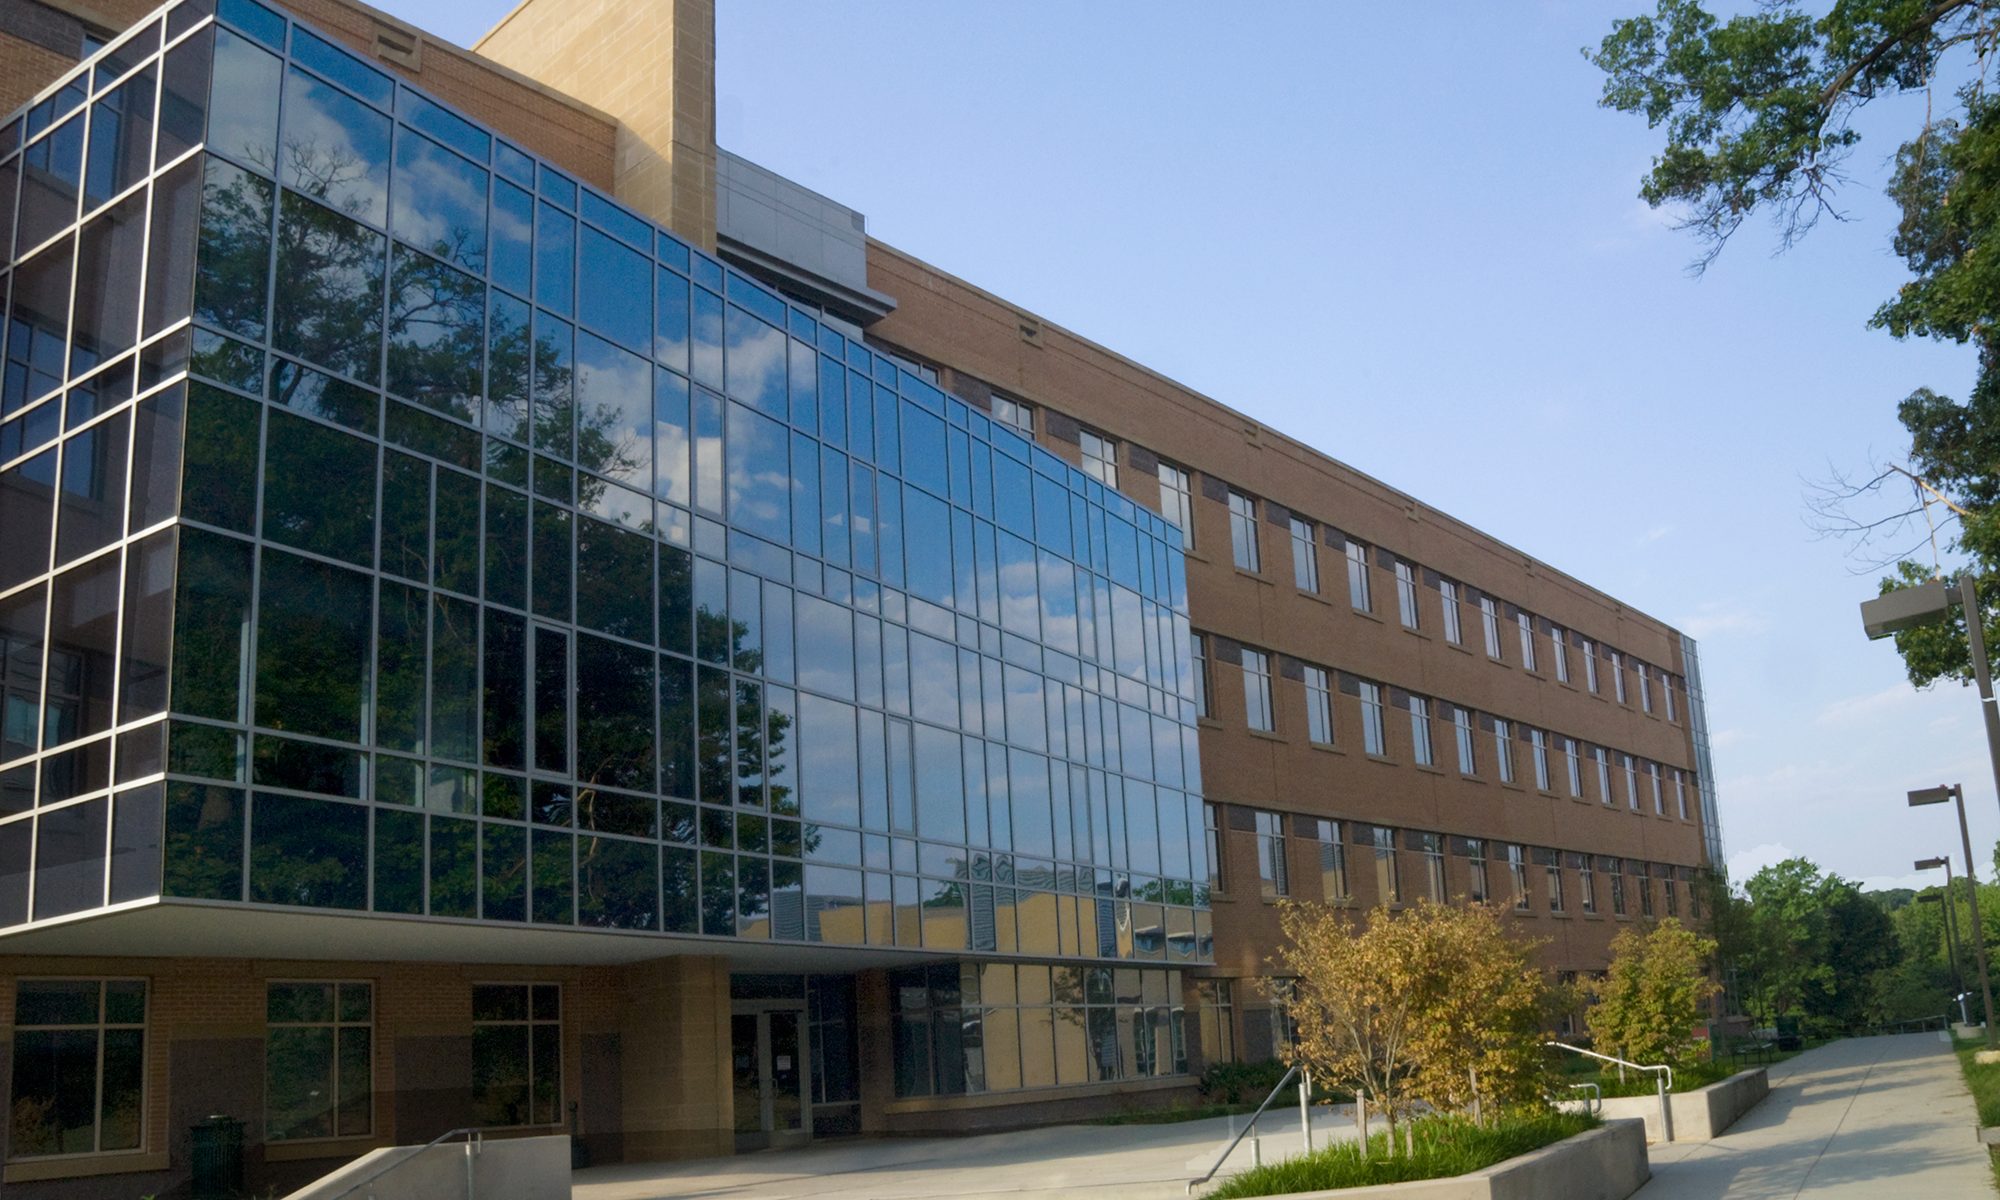 Exterior of Academic VI/Research II Building at George Mason University